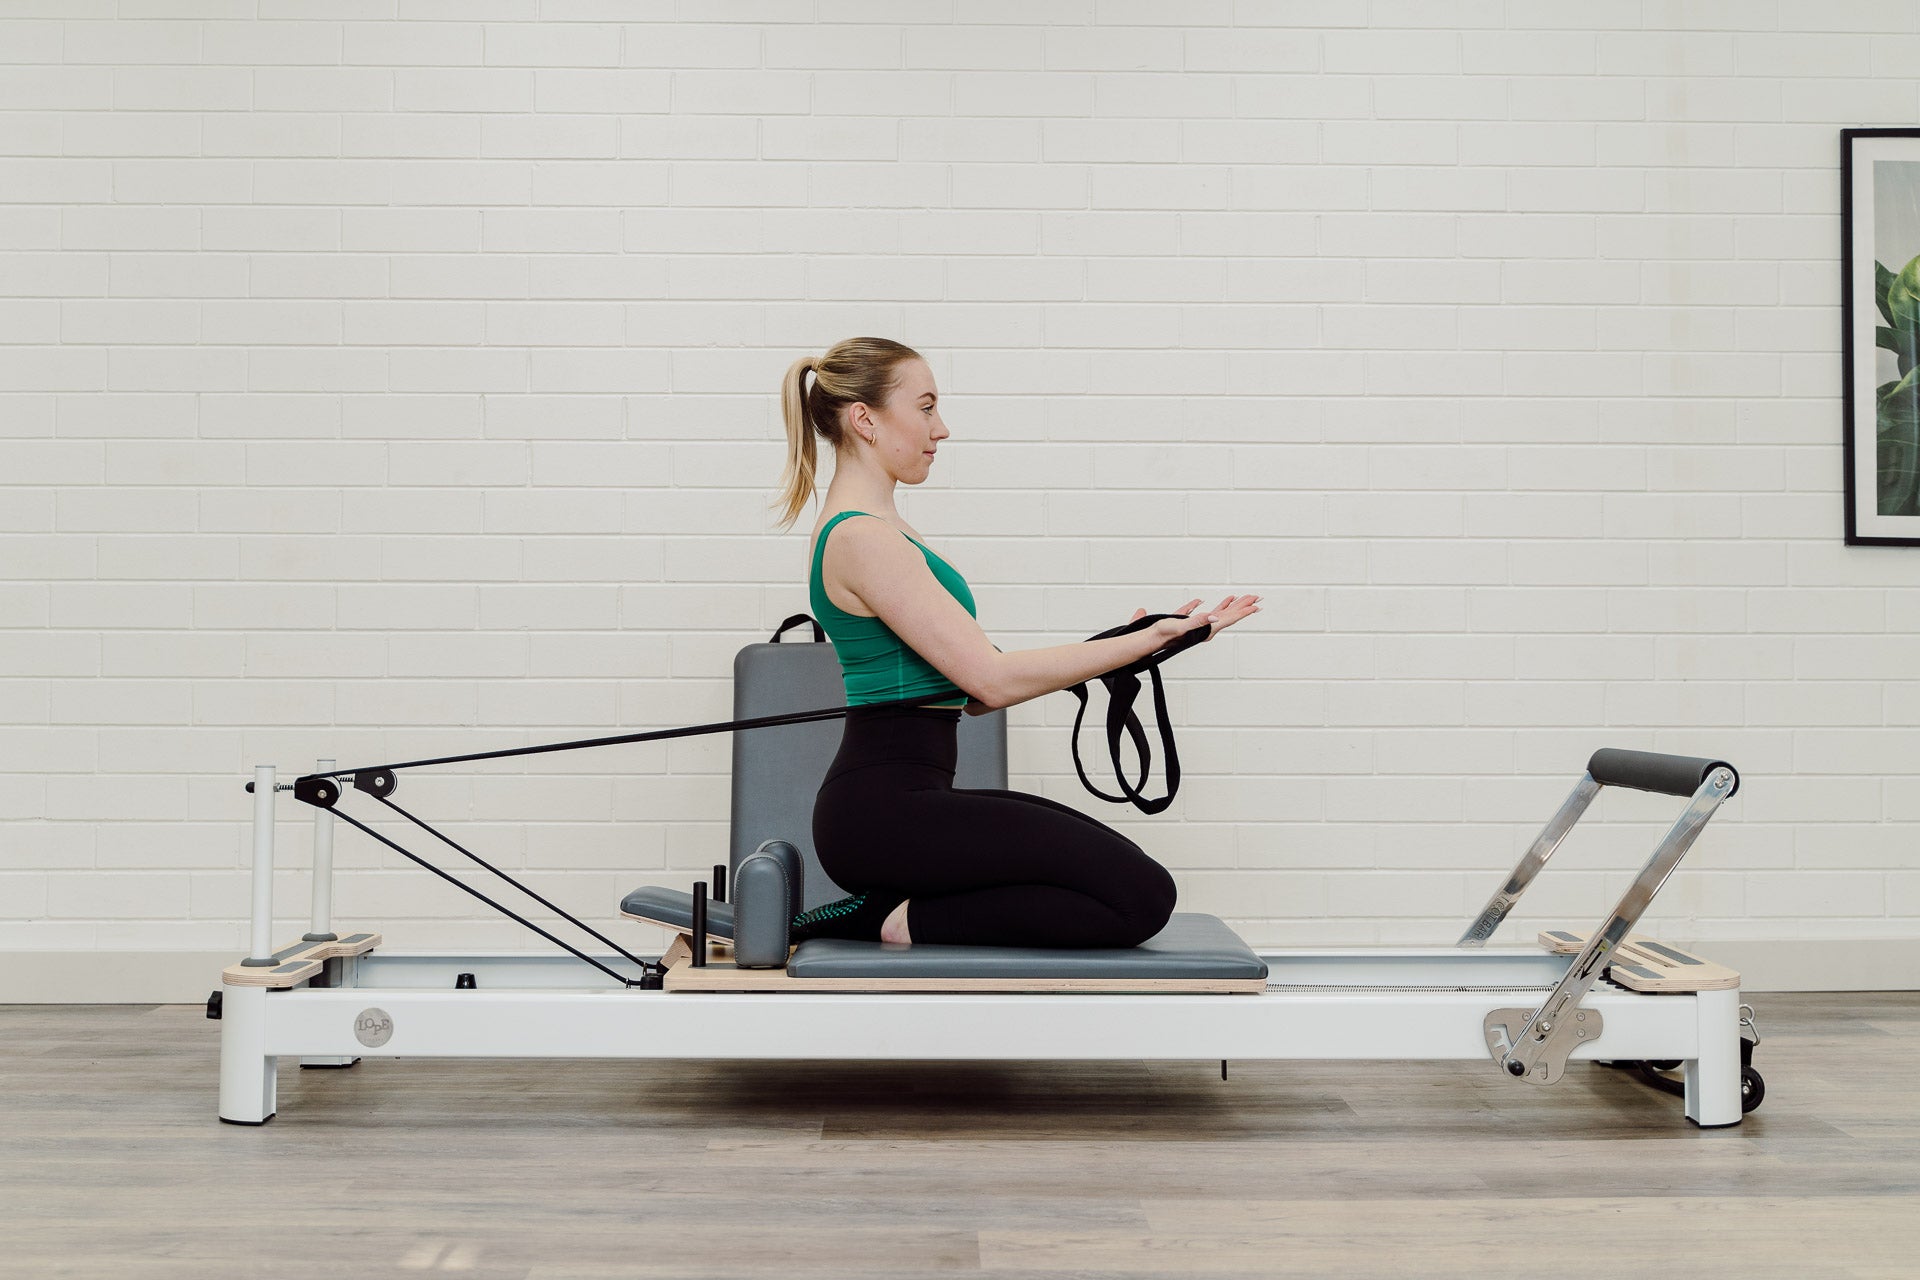 Australia's #1 in Reformer Pilates equipment and accesories